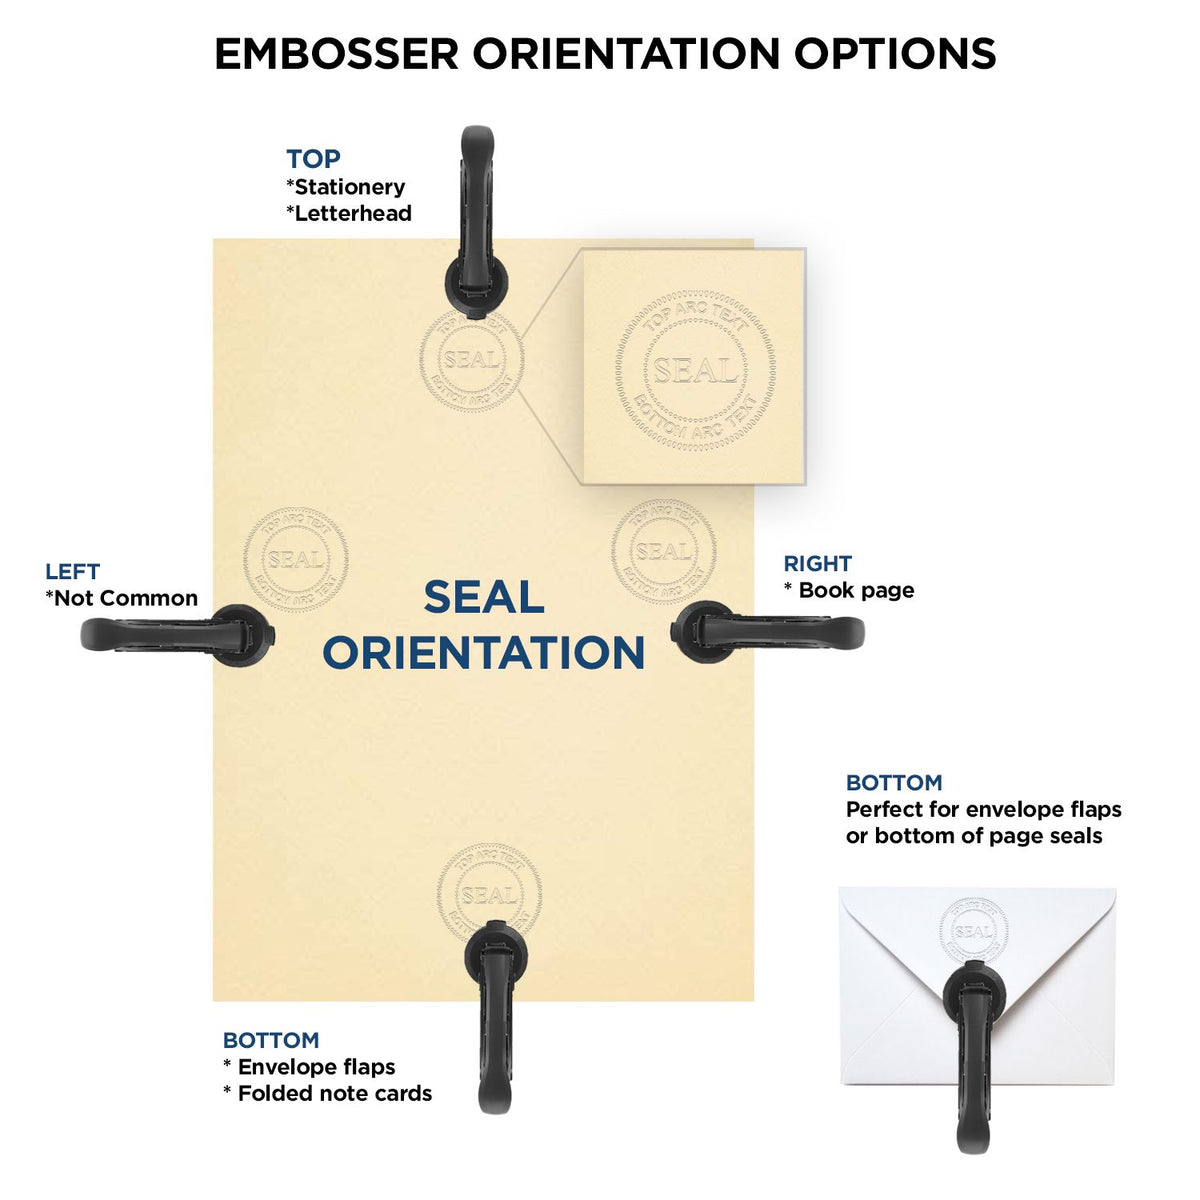 An infographic for the Handheld Florida Professional Engineer Embosser showing embosser orientation, this is showing examples of a top, bottom, right and left insert.